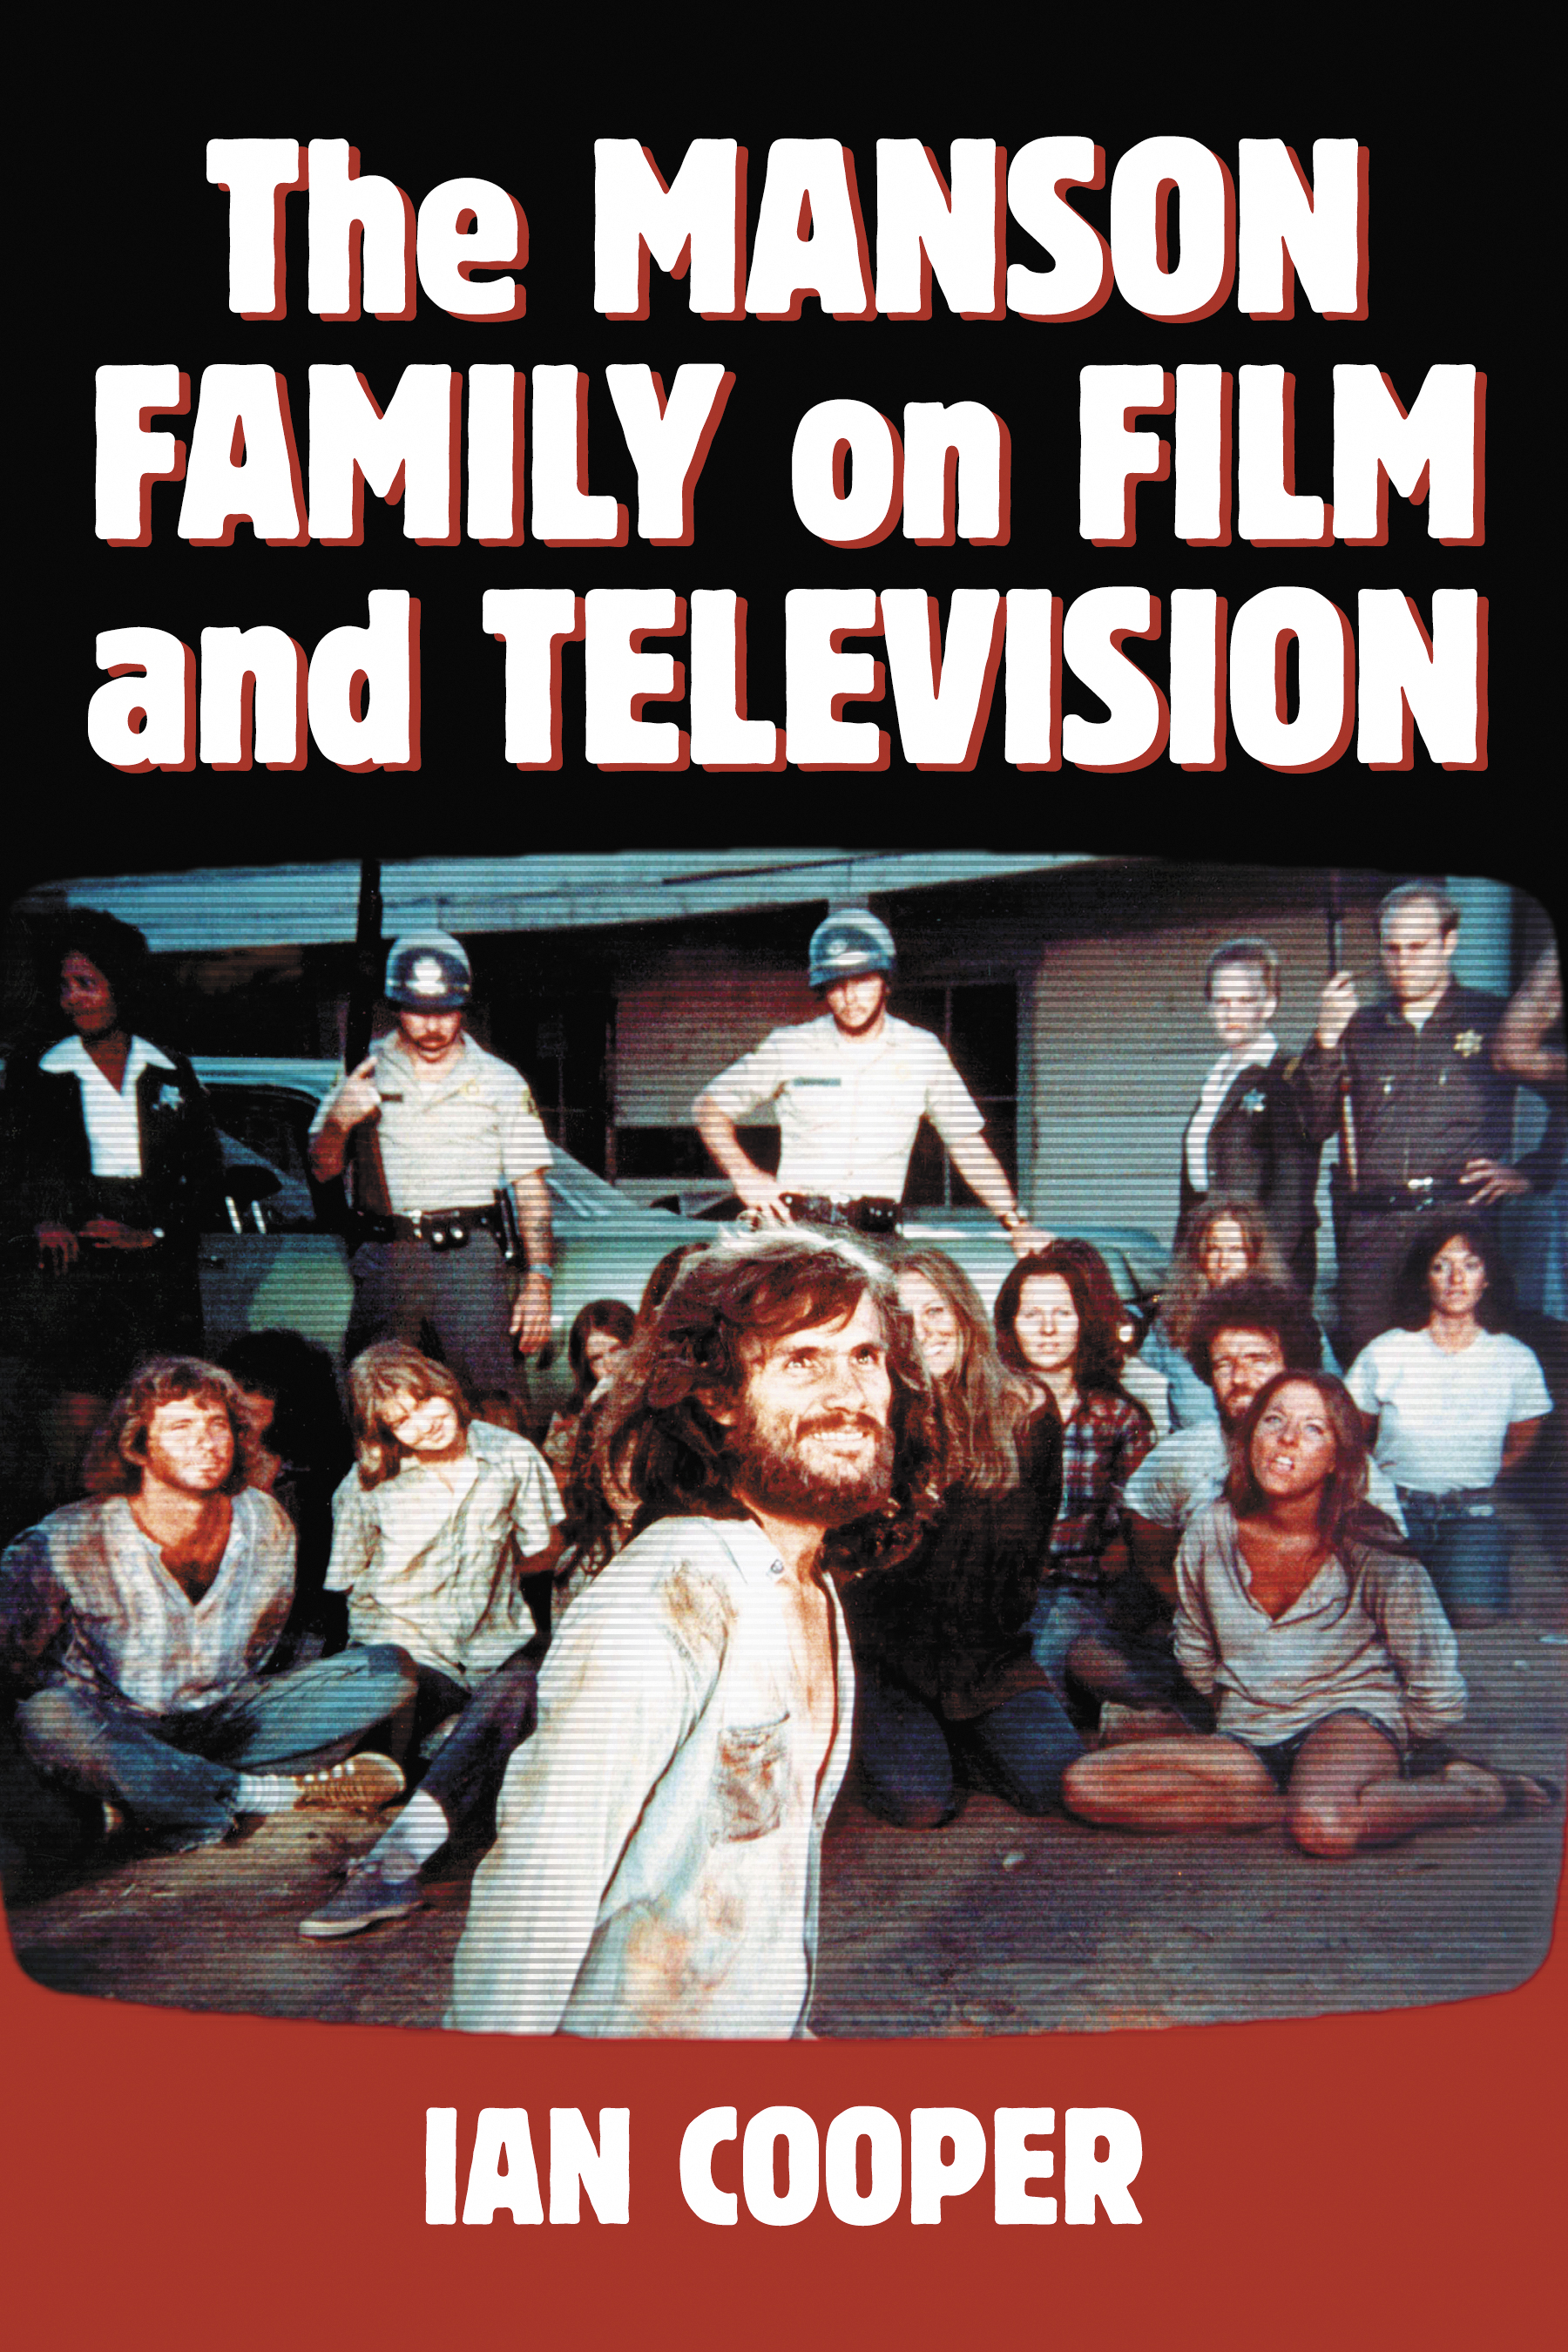 The Manson Family on Film and Television - 15-24.99